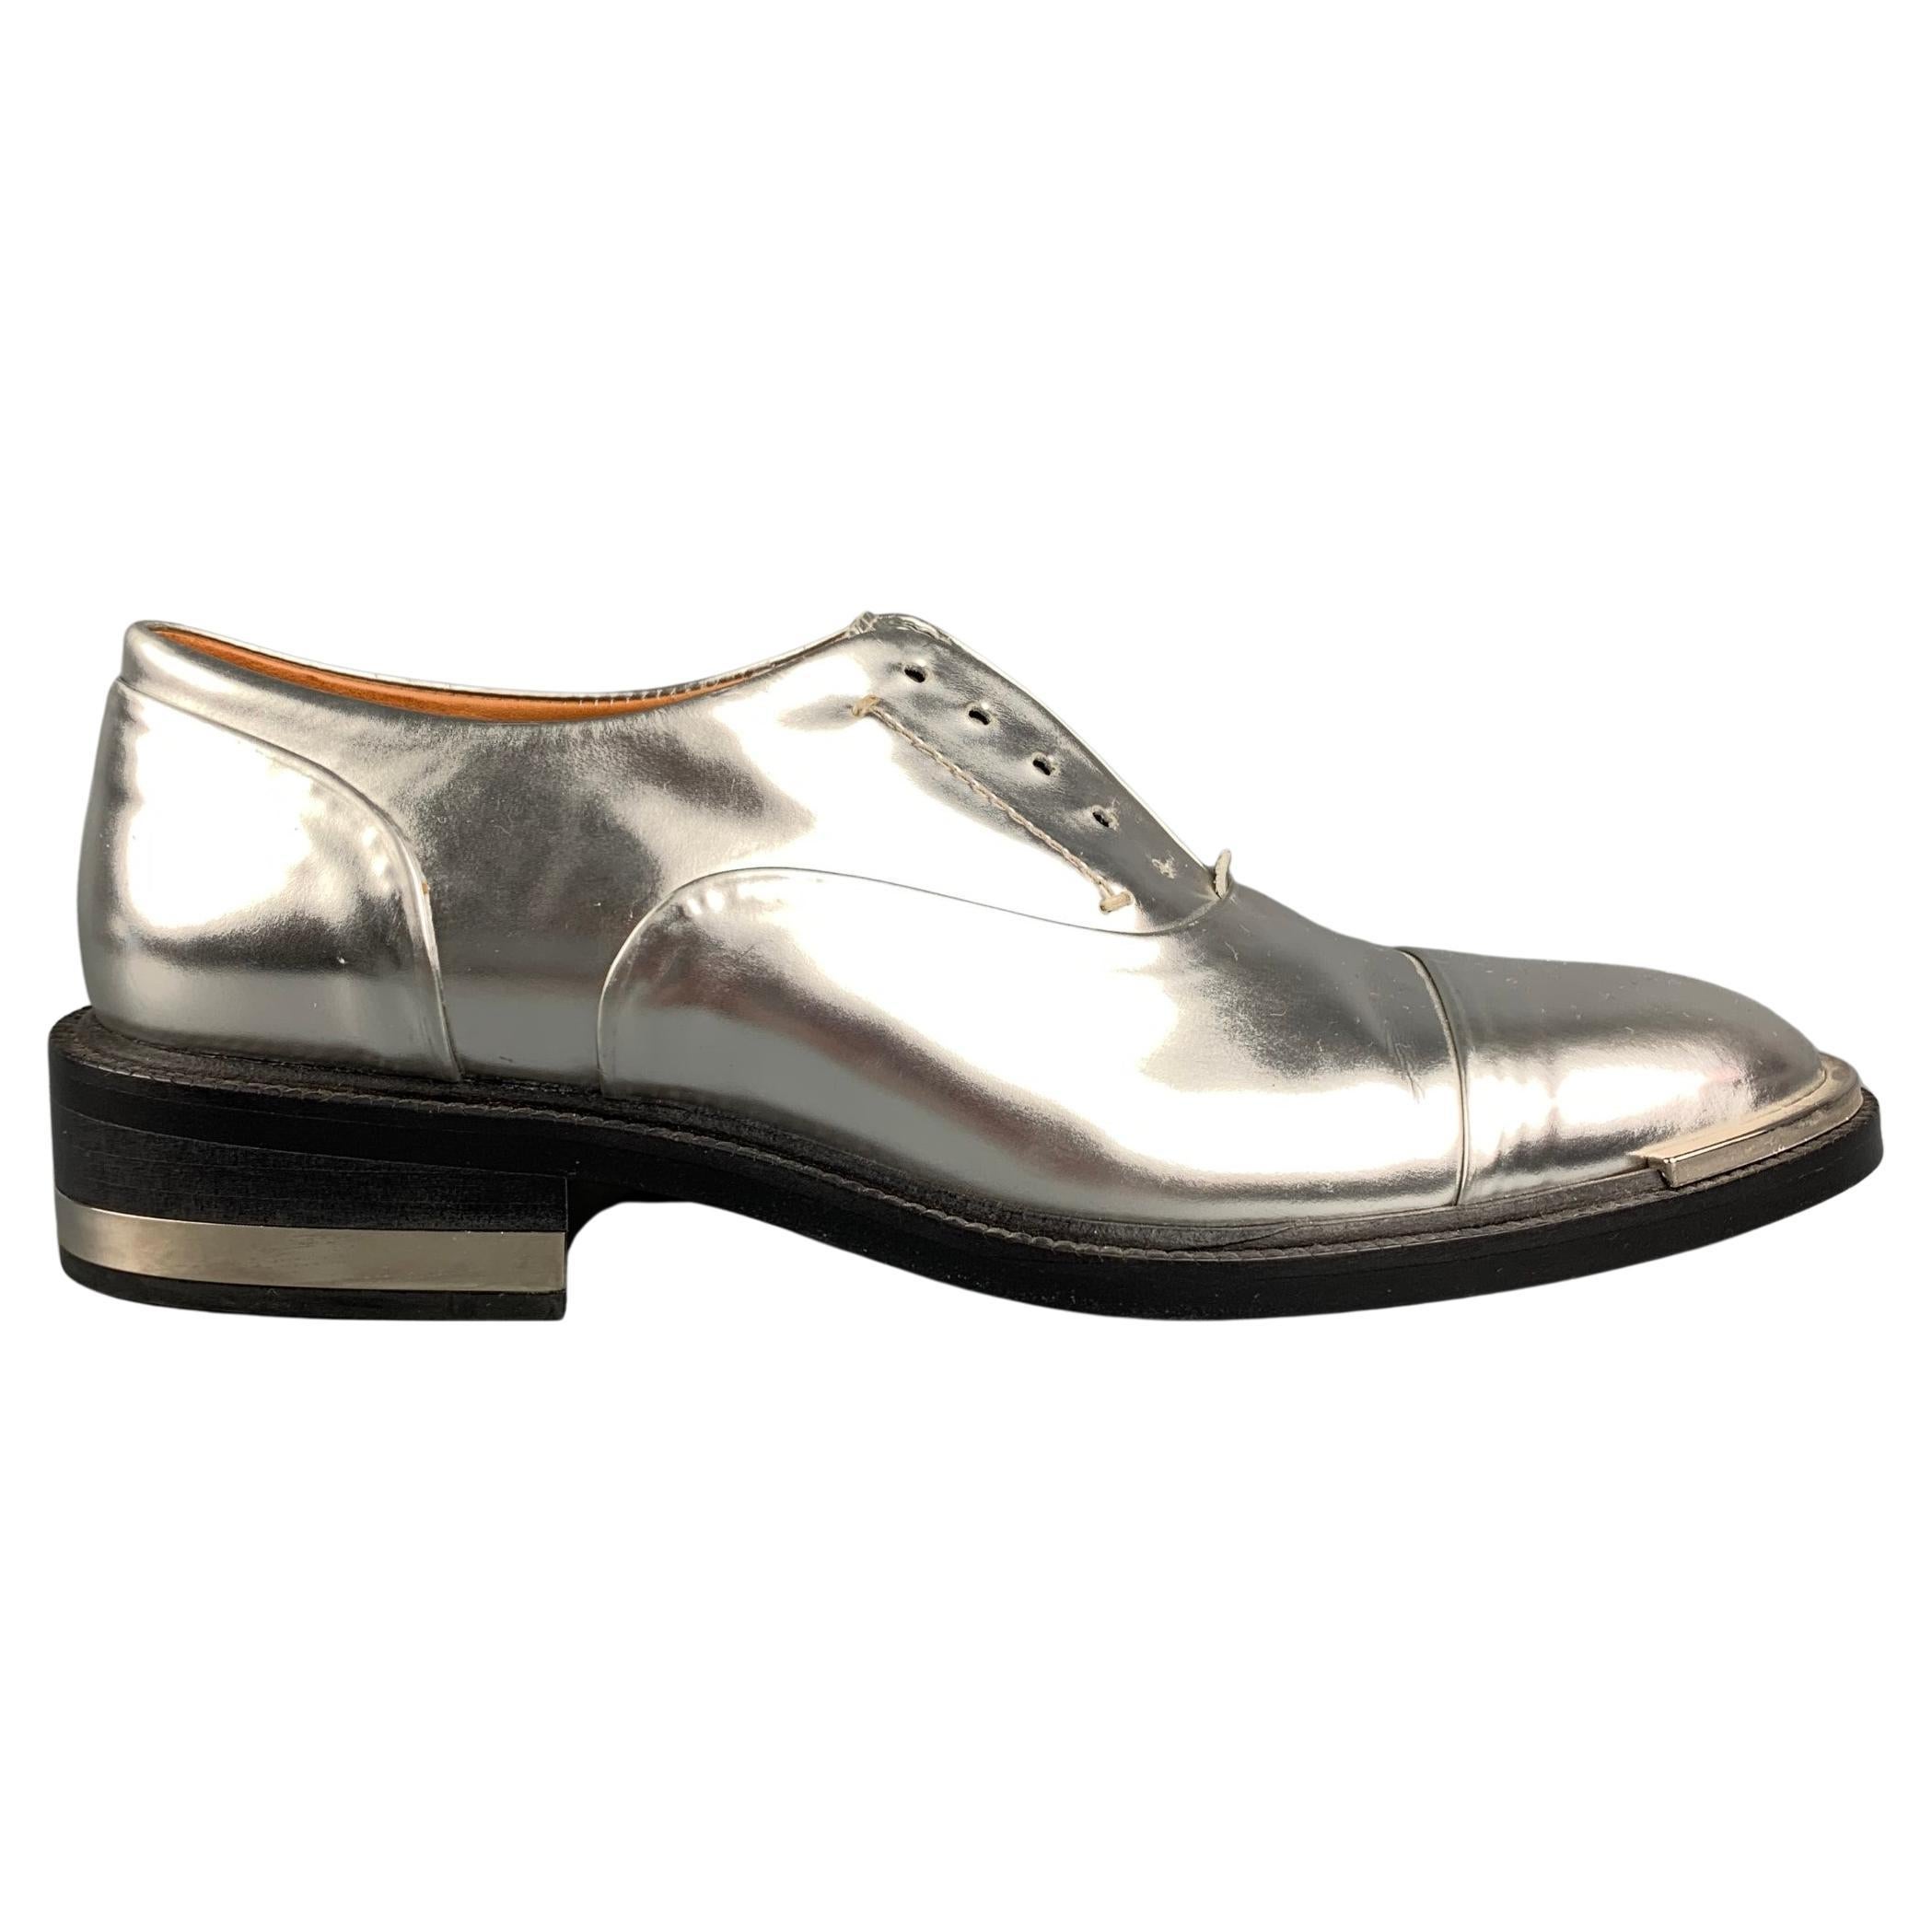 BARBARA BUI Size 7 Silver Leather Metallic Patent Leather Shoes